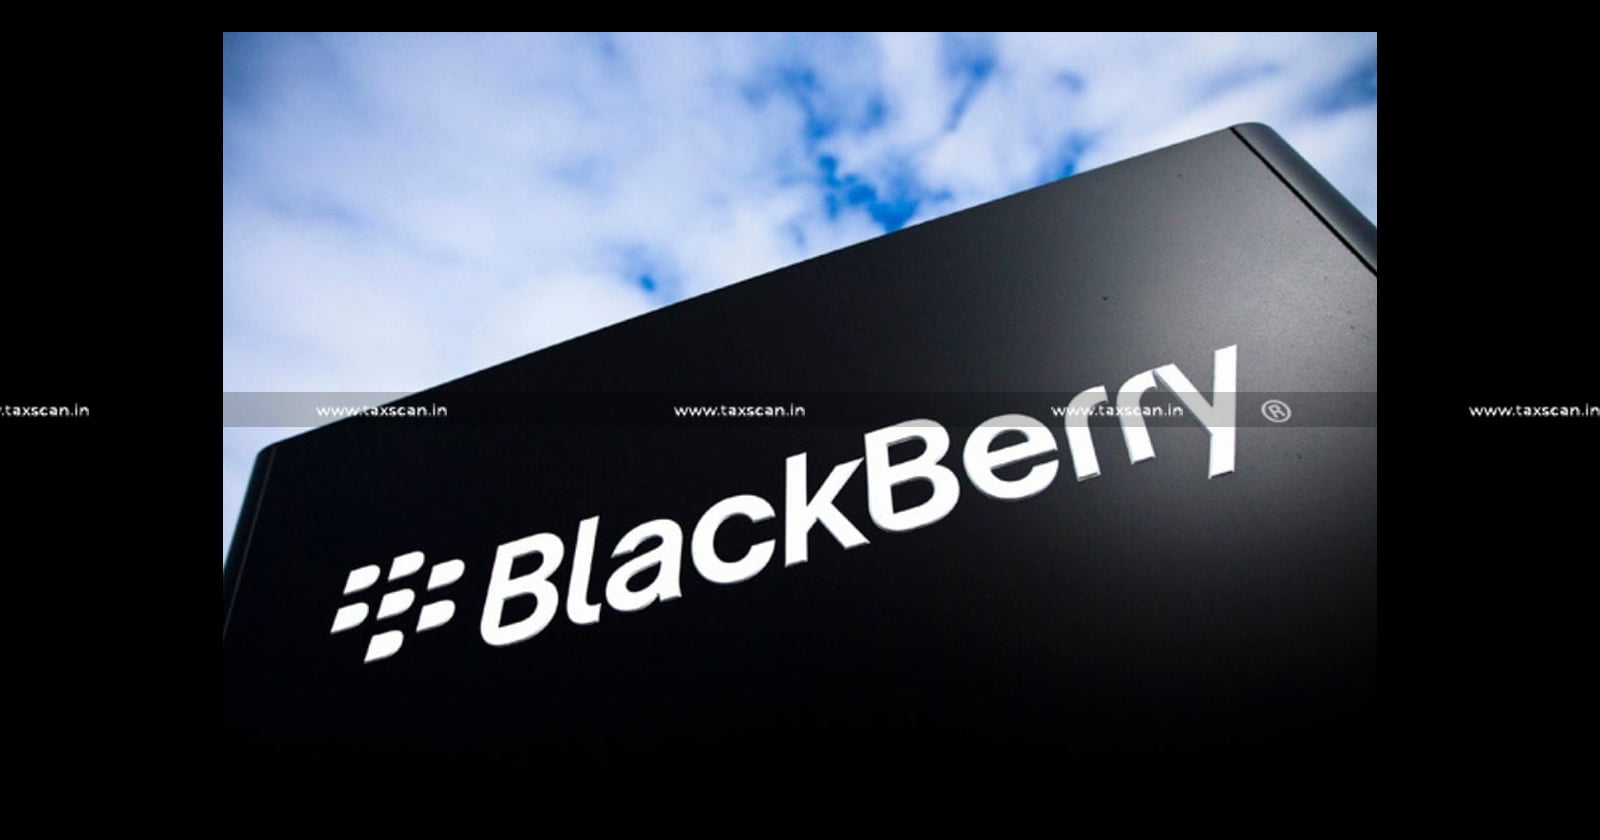 Supreme Court - Excise Duty - Excise Duty Refund - Blackberry Supreme Court ruling - Excise duty refund with interest - Blackberry India legal update - Blackberry India - Refund - TAXSCAN